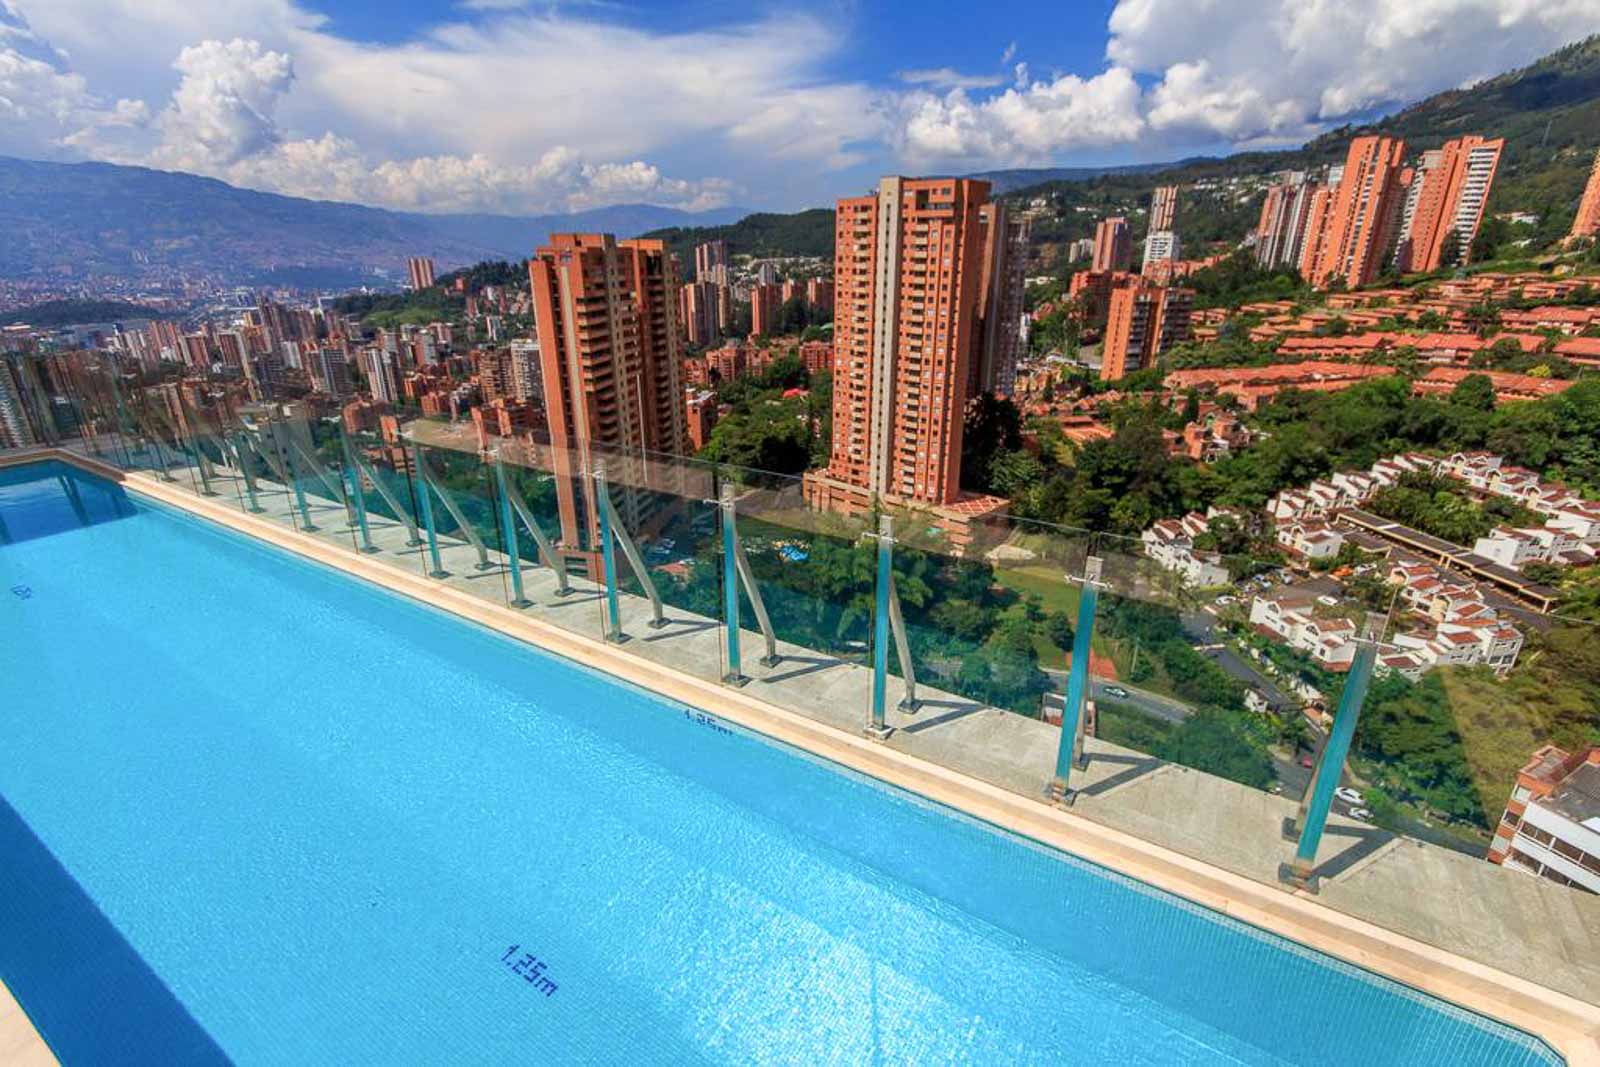 Where to stay in Medellin Honeymoon for Couples